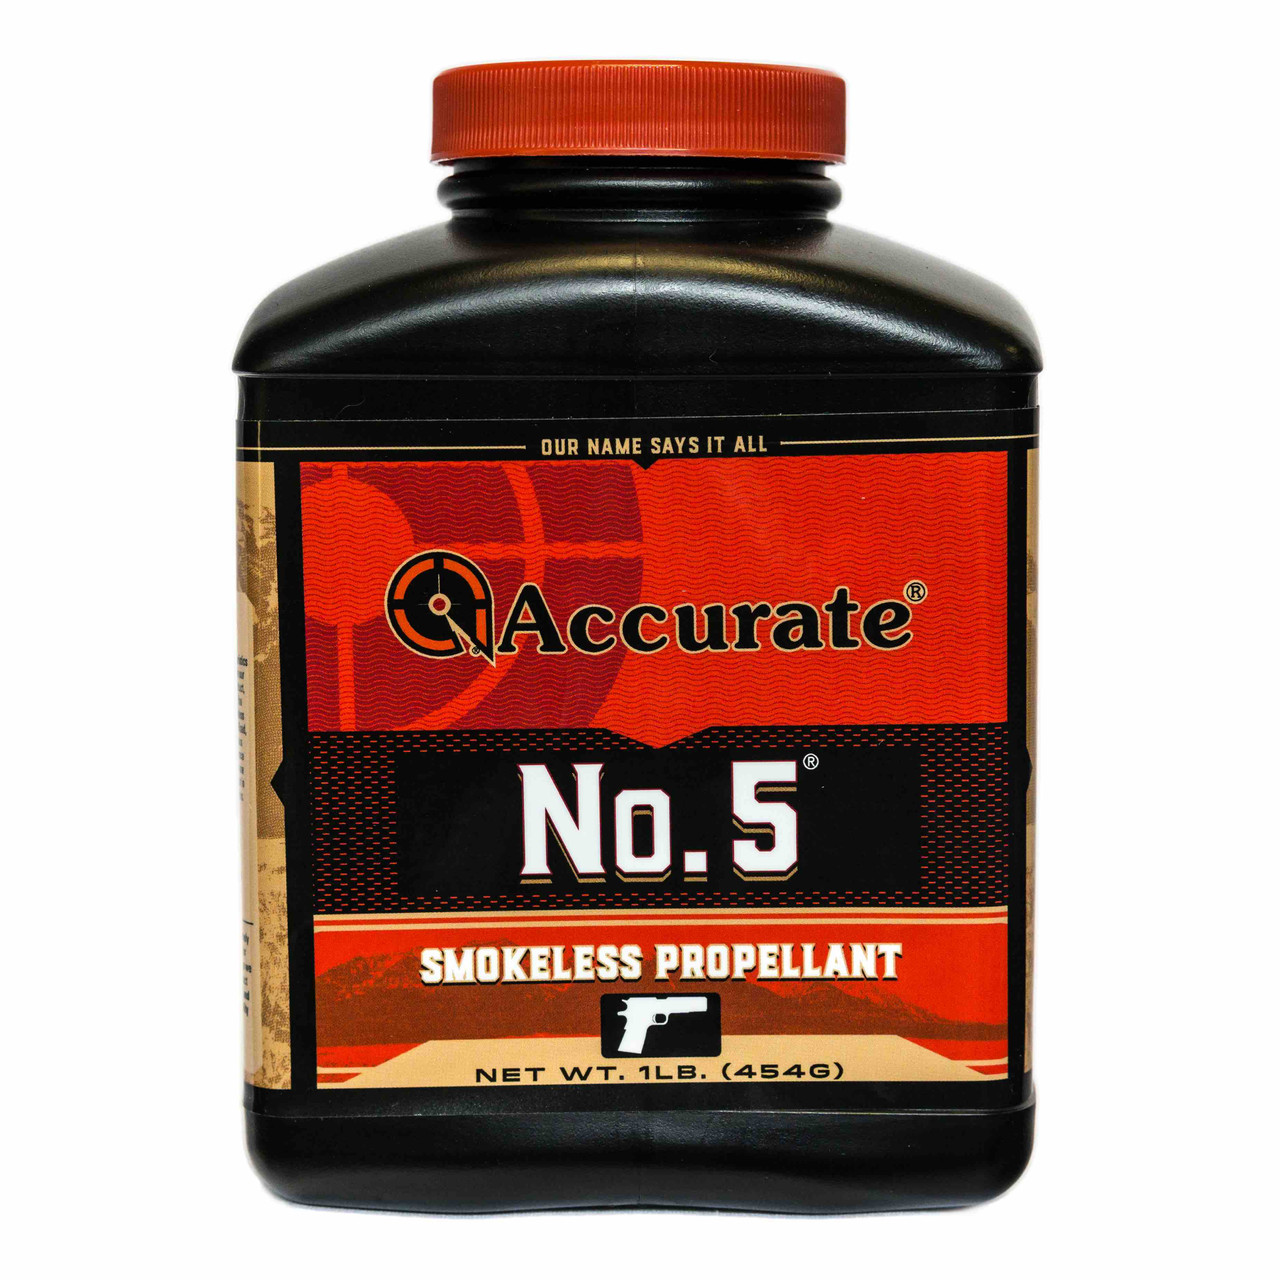 = OUR'NAME SAYS IT ALL——————— vu |
&
Q 31/a\ ~ ®)
N Accurate

No.5

SMOKELESS PROPELLANT

.
«
.

o NET WT. 1LB. (4546